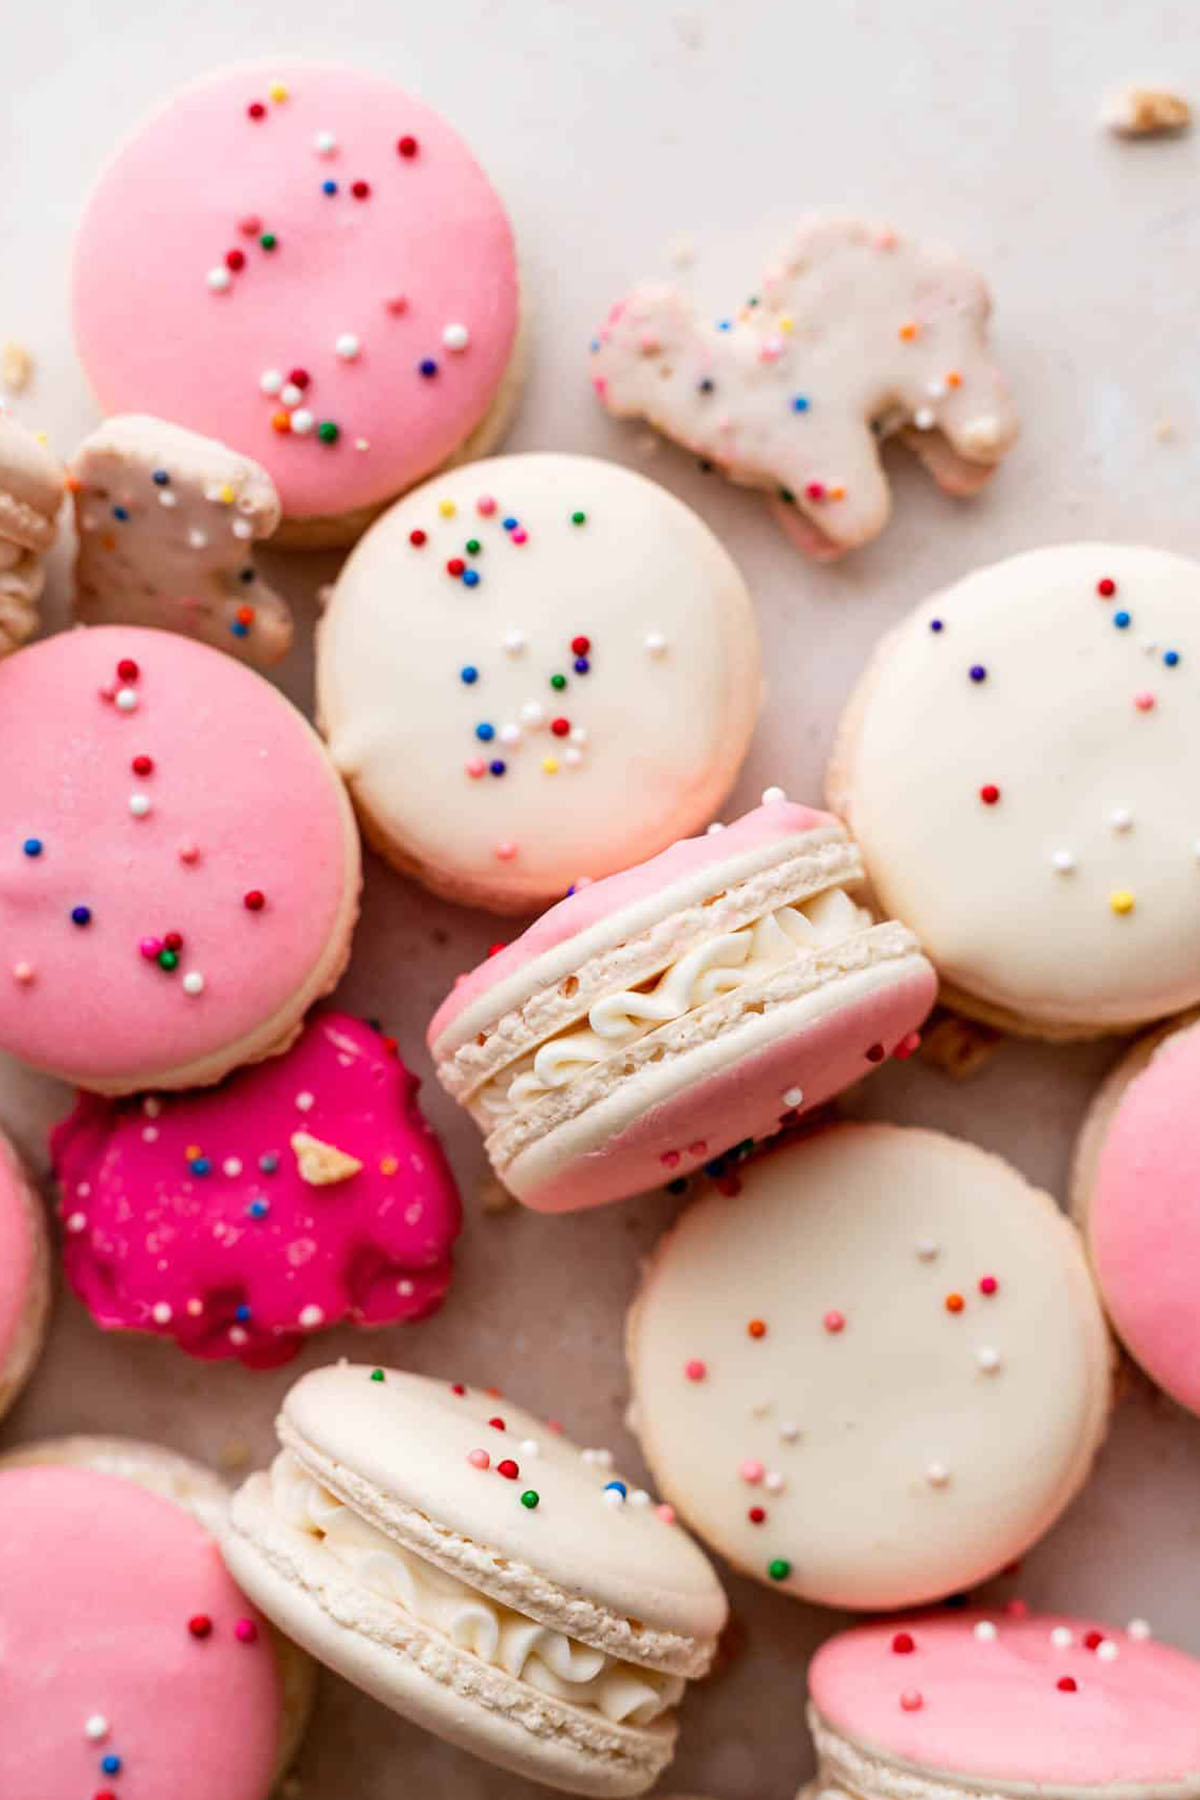 birthday macarons with pink and white tops garnished with sprinkles.